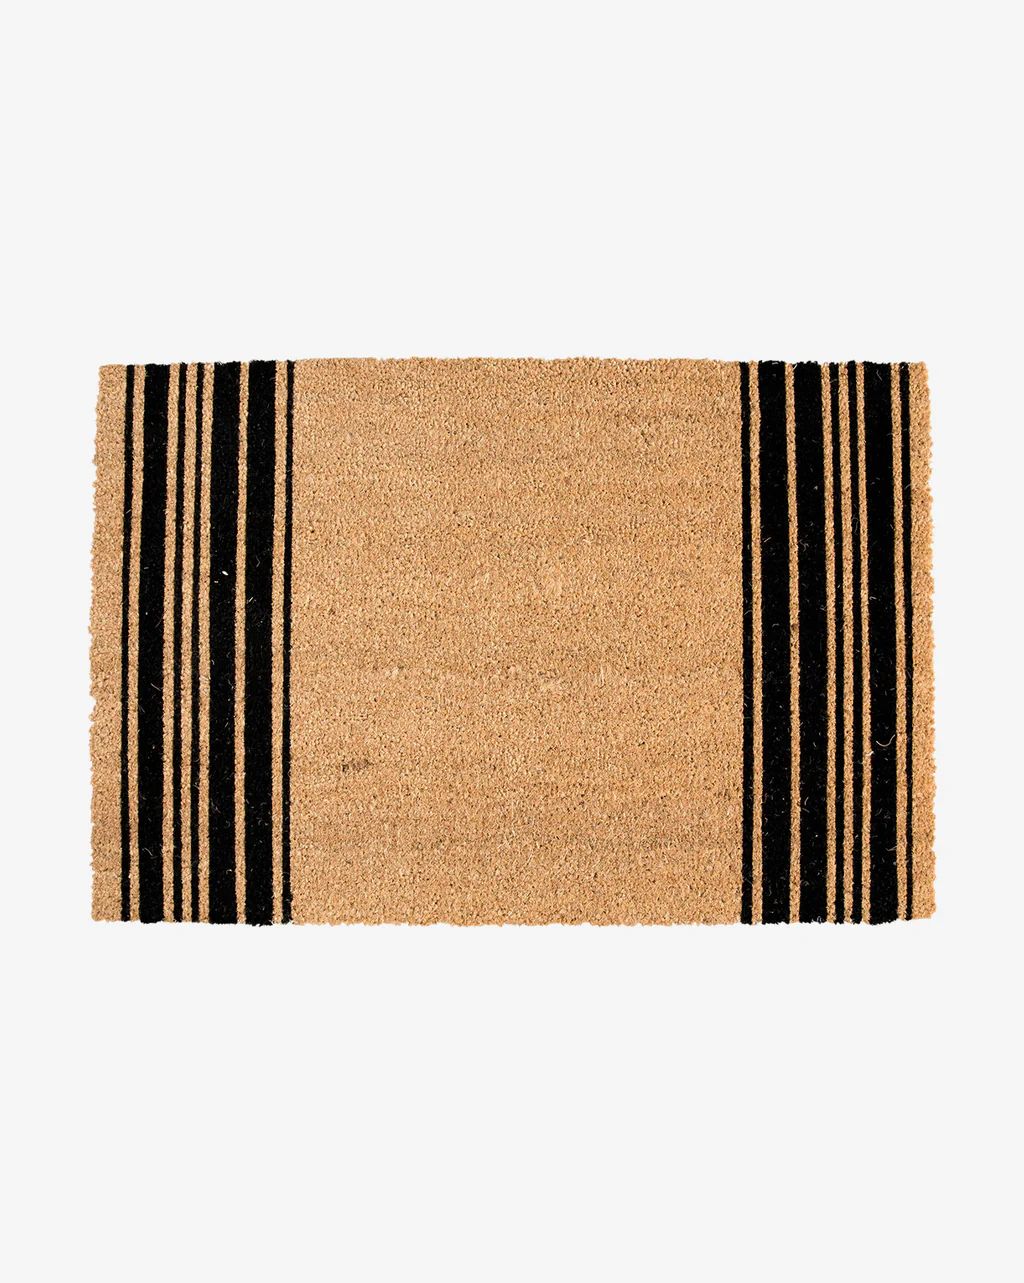 French Stripe Doormat | McGee & Co.